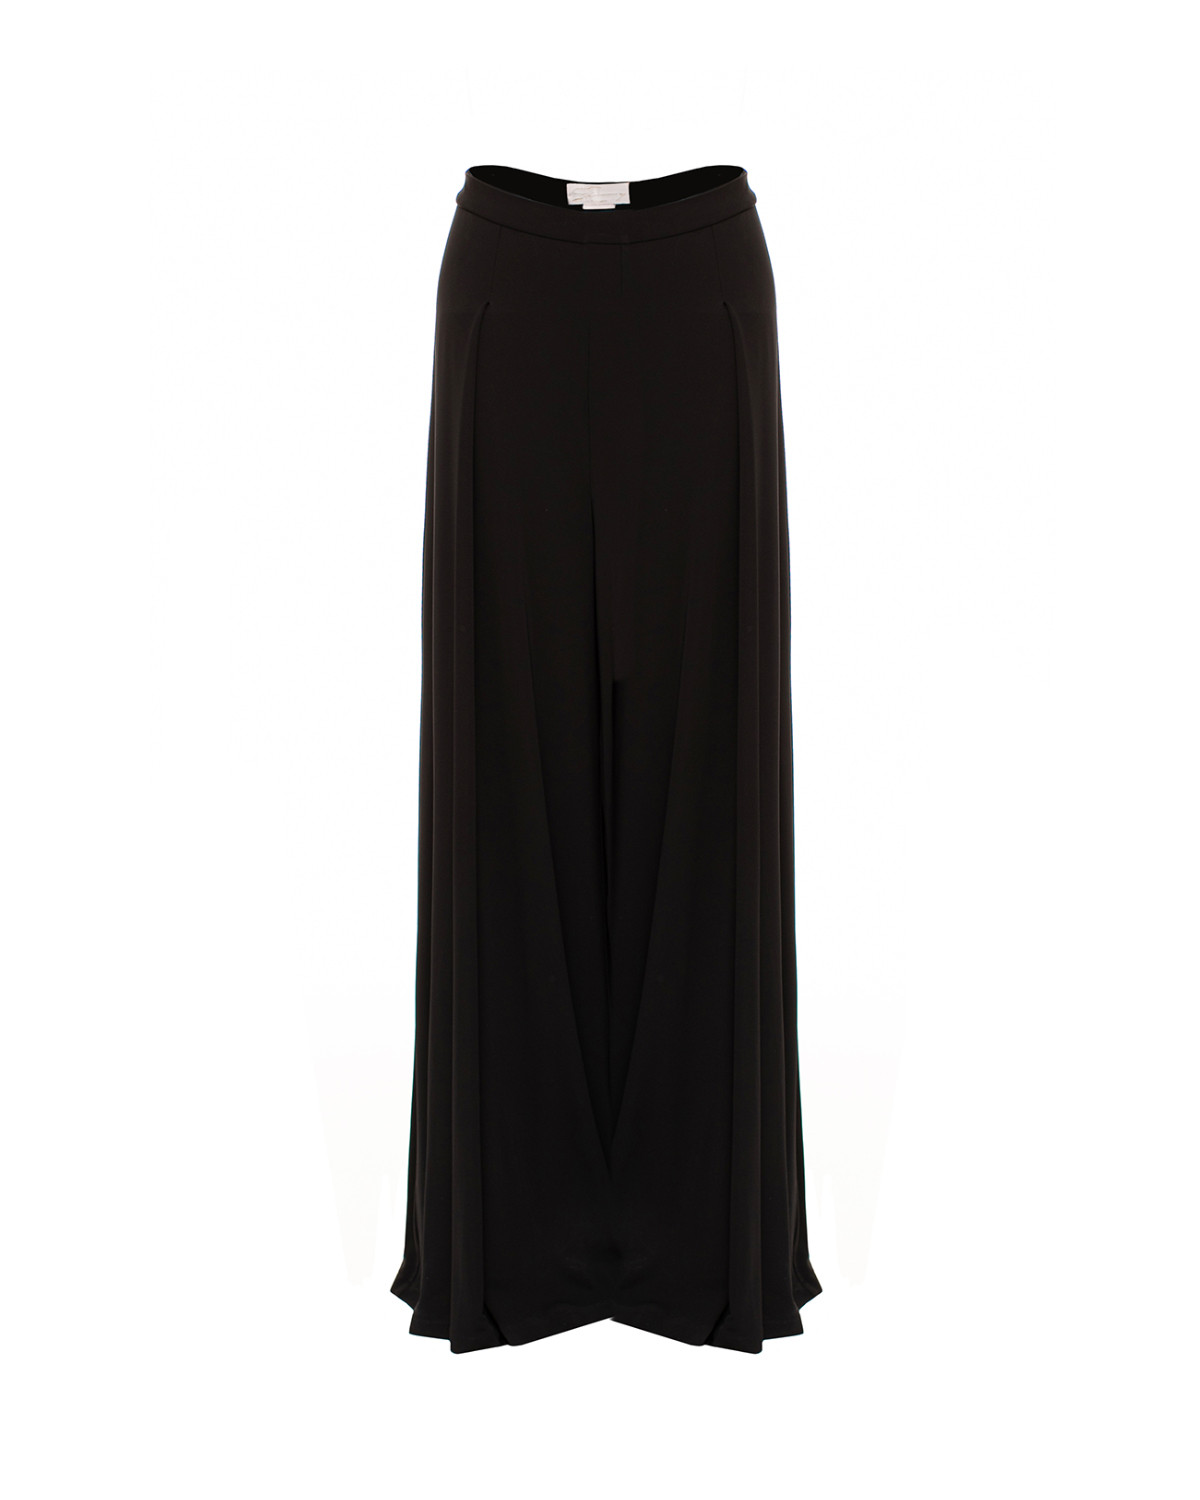 Black jersey pants with pleats